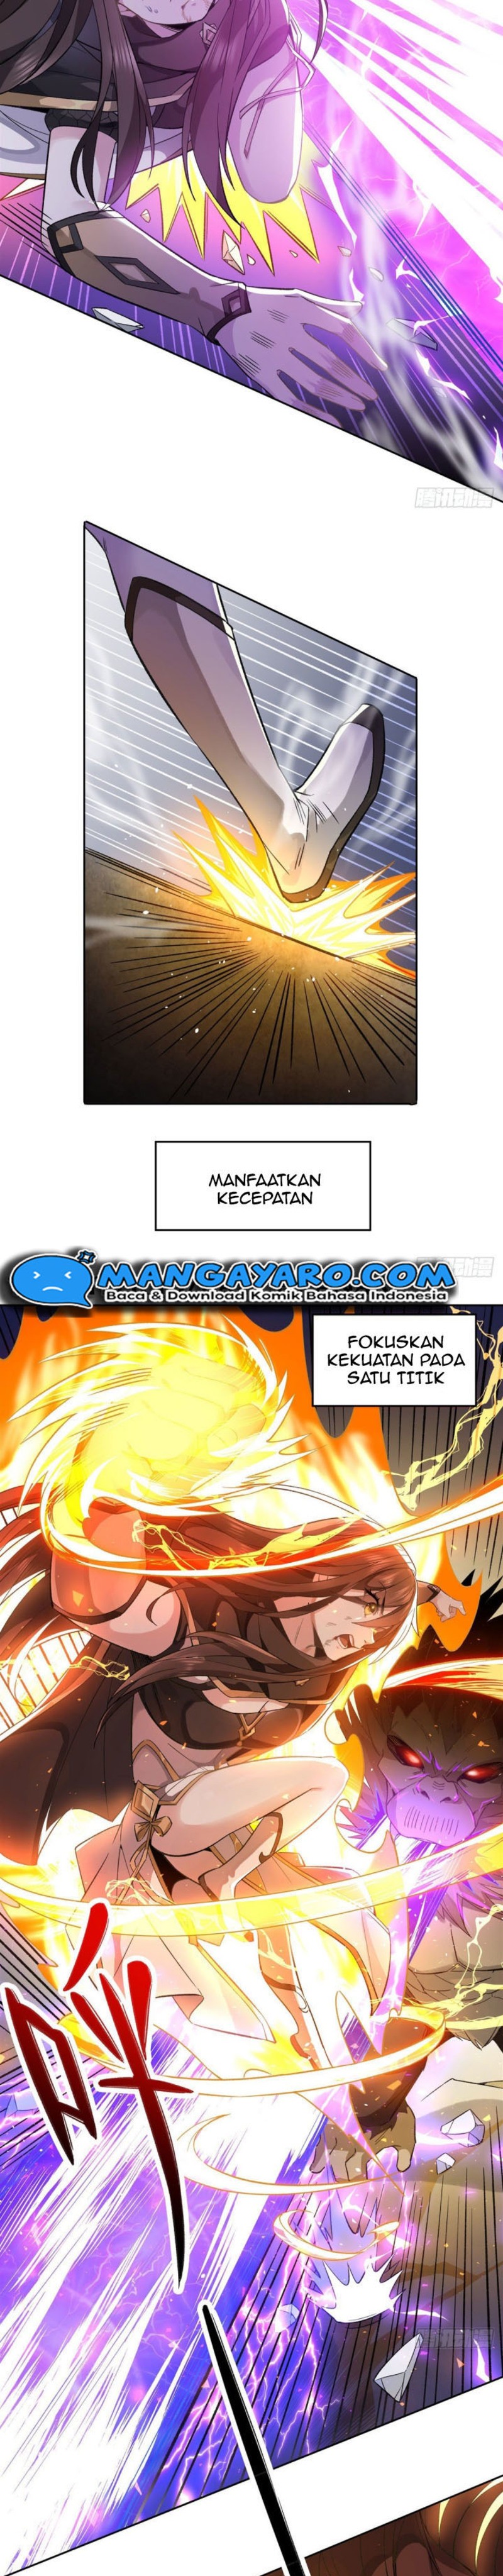 Dilarang COPAS - situs resmi www.mangacanblog.com - Komik my female apprentices are all big shots from the future 011 - chapter 11 12 Indonesia my female apprentices are all big shots from the future 011 - chapter 11 Terbaru 2|Baca Manga Komik Indonesia|Mangacan